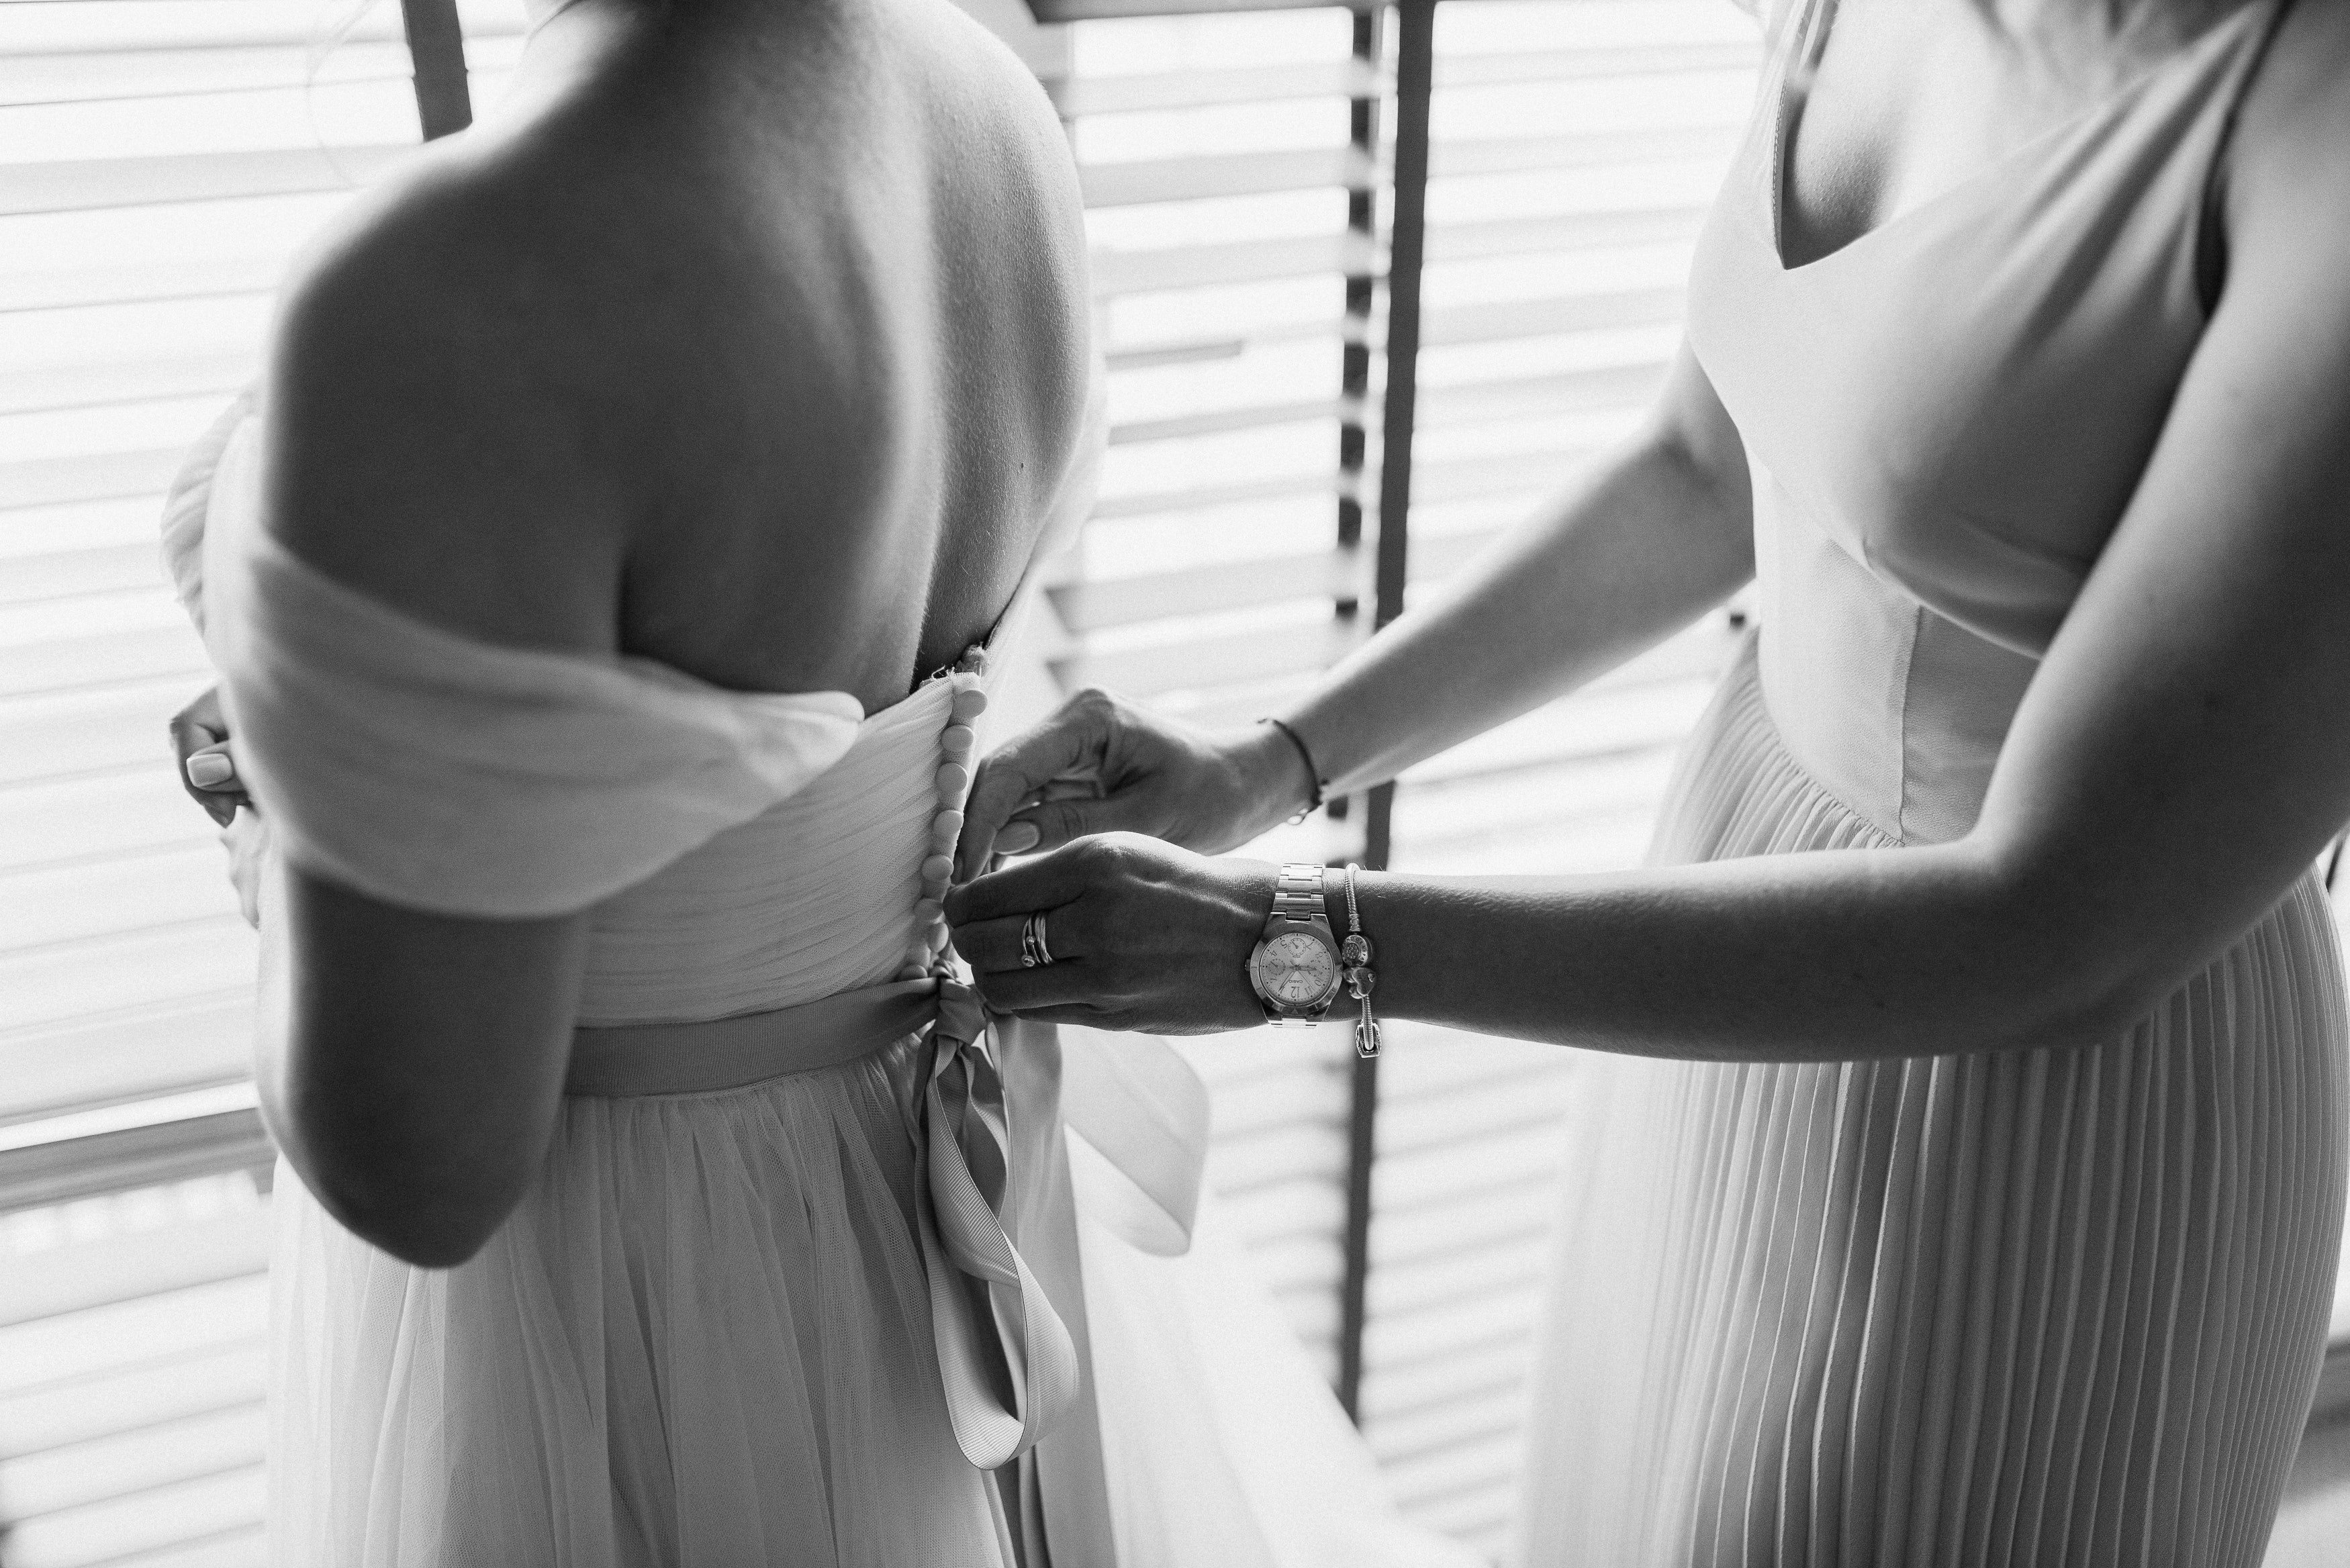 Lisa had been with her daughter in the dressing room when Bradley's mother strolled in to check out the beautiful bride | Source: Pexels